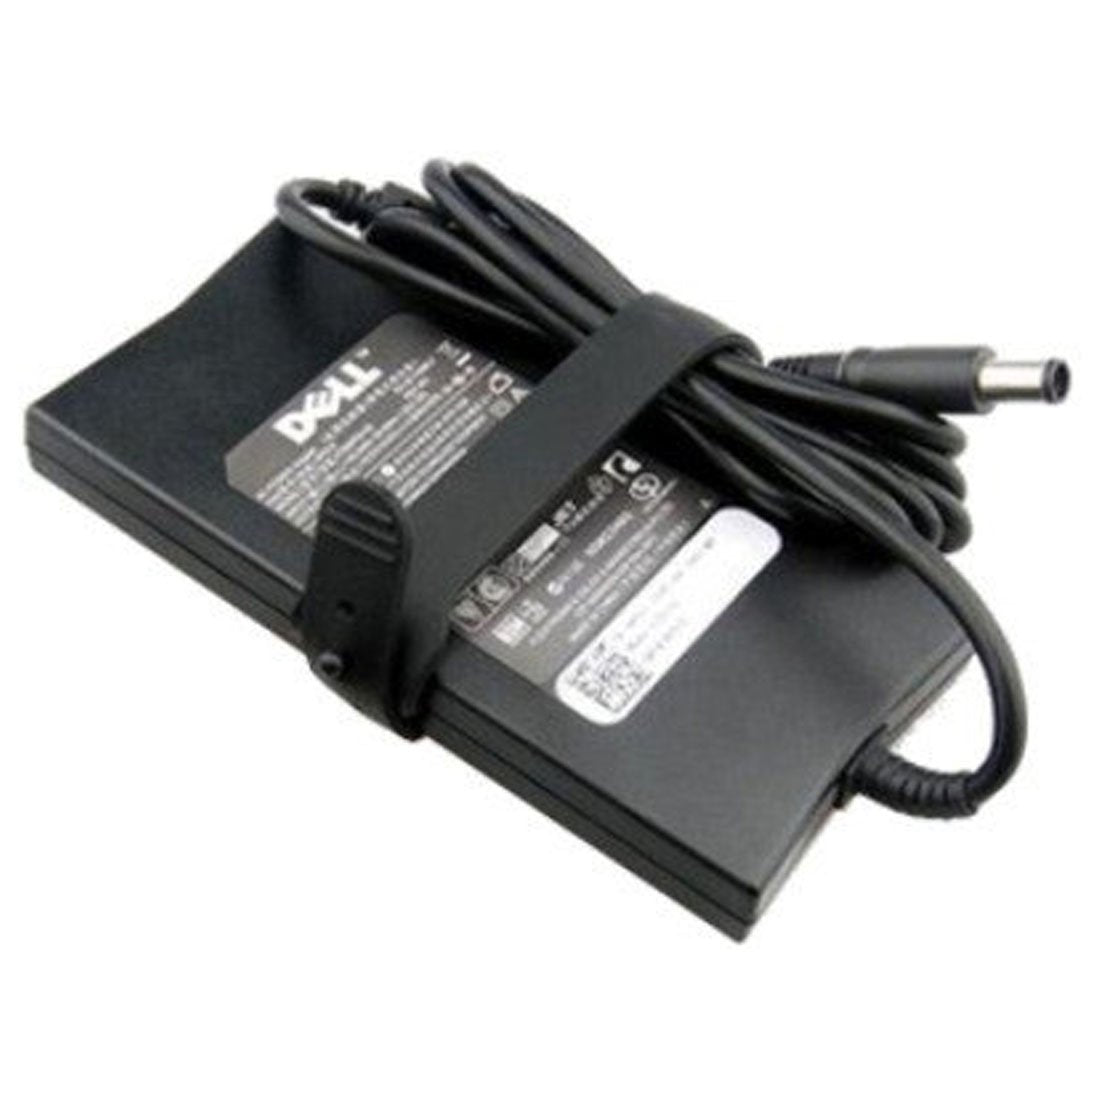 Dell Original 130W 19.5V 7.4mm Pin Laptop Charger Adapter for Precision M6300 With Power Cord